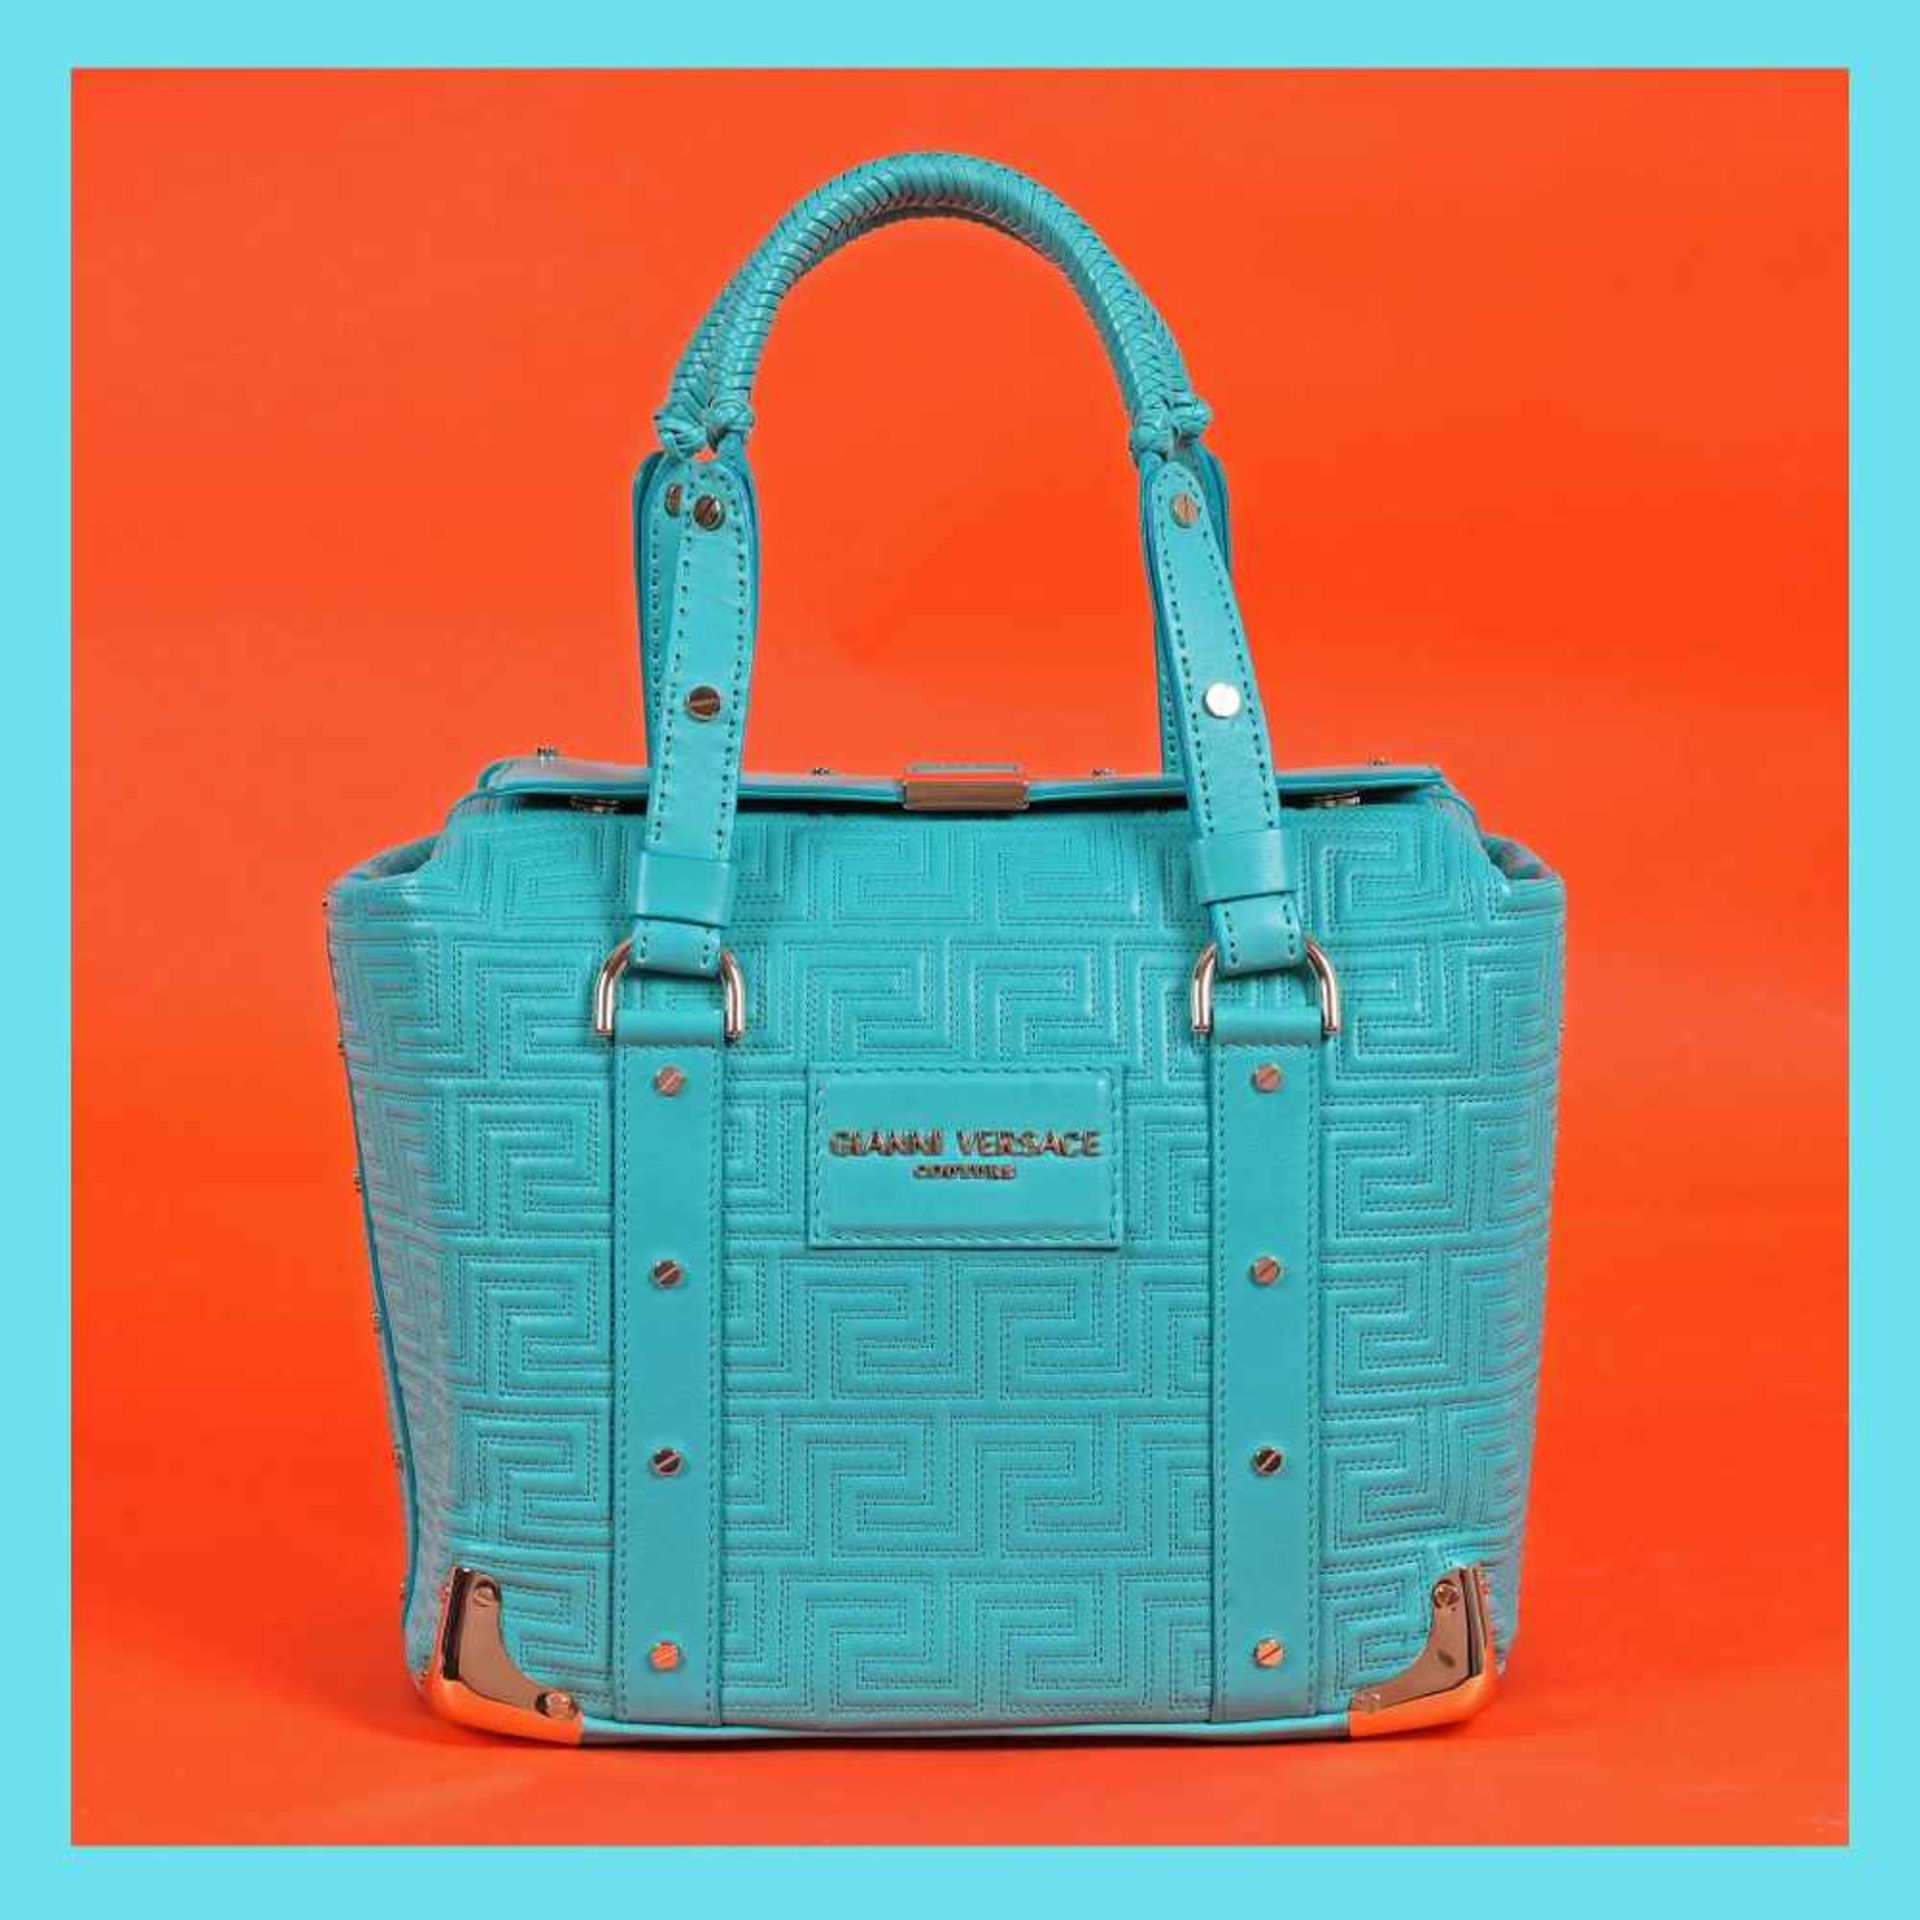 Gianni Versace Couture bag, leather, with greca motif, turquoise, for women